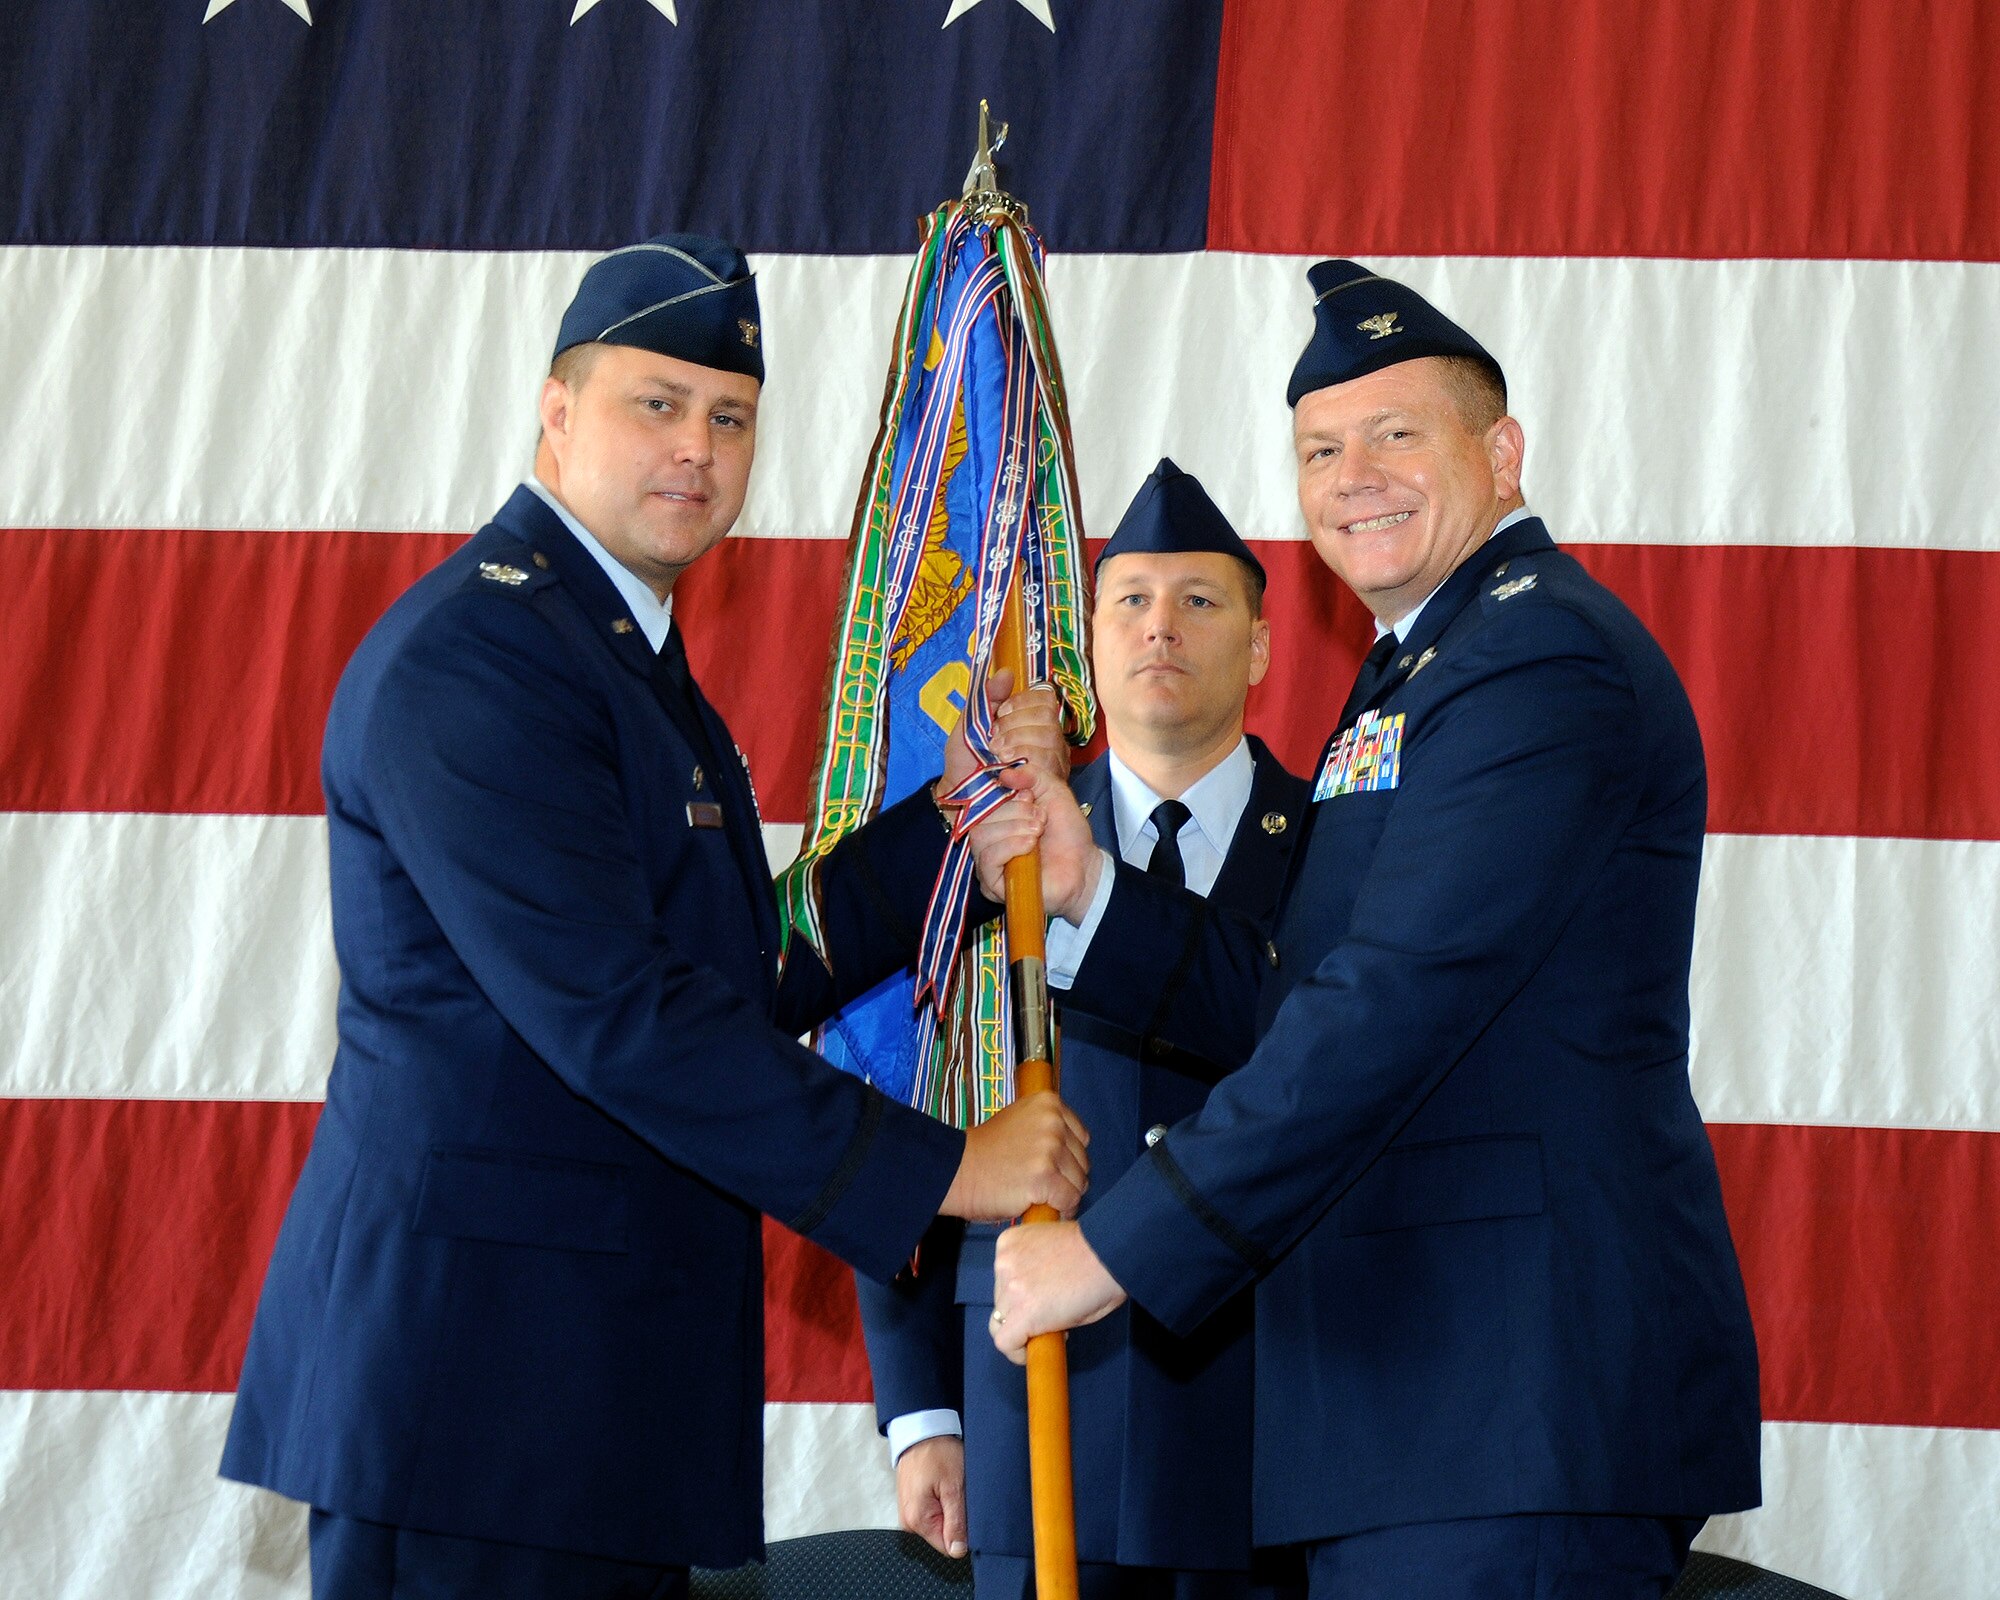 Col. John Nichols, 14th Flying Training Wing Commander, passes the 14th Operations Group guidon to Col. Stan Lawrie, the new 14th OG Commander, during a change of command ceremony July 15 at Columbus Air Force Base, Mississippi. (U.S. Air Force photo/Sharon Ybarra)